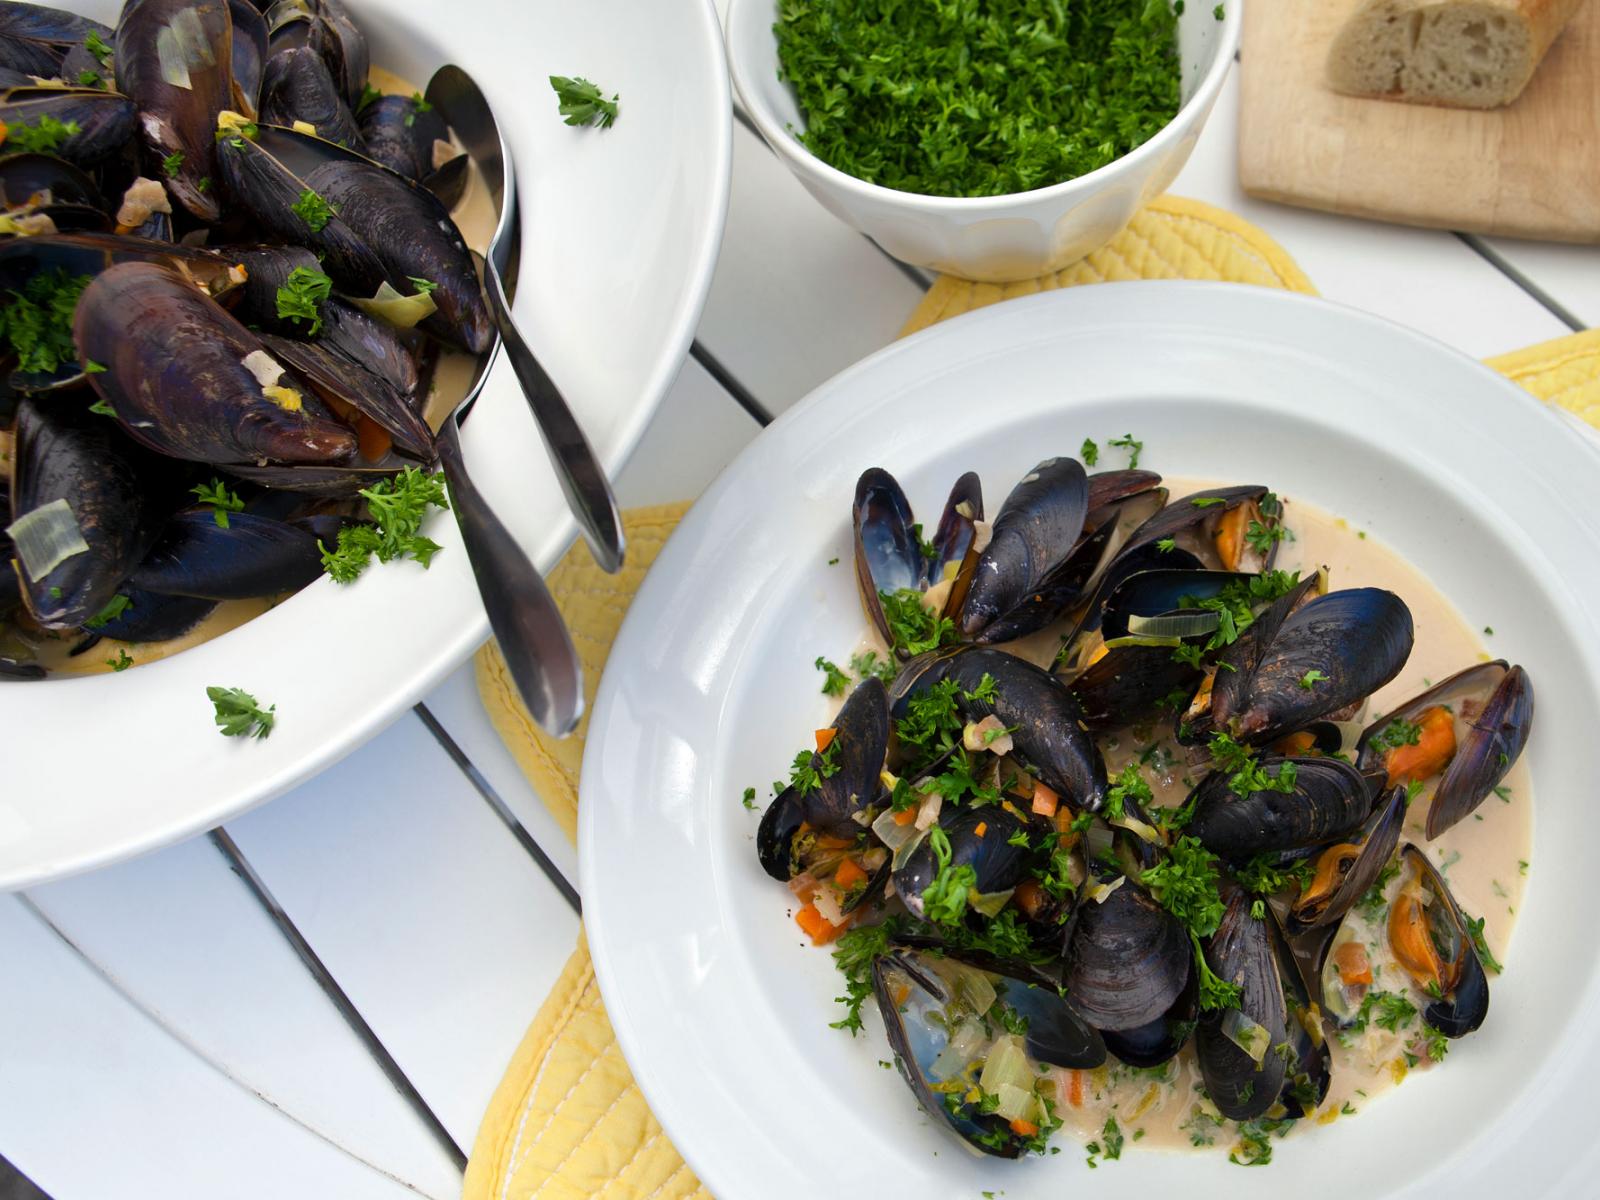 Steamed Mussels in a Beer, Cream and Garlic Sauce Recipe